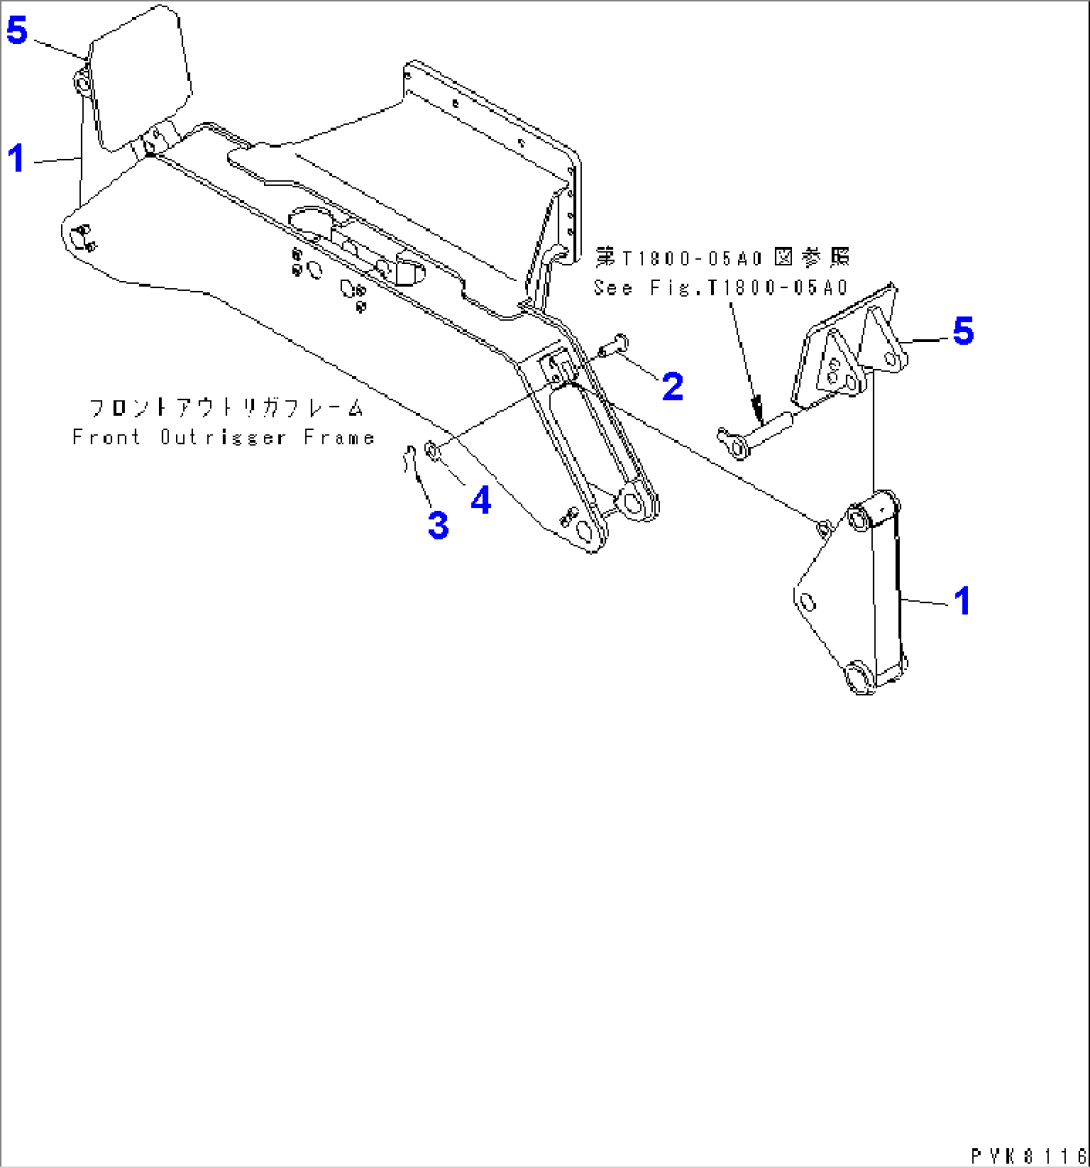 LEG (FOR FRONT OUTRIGGER)